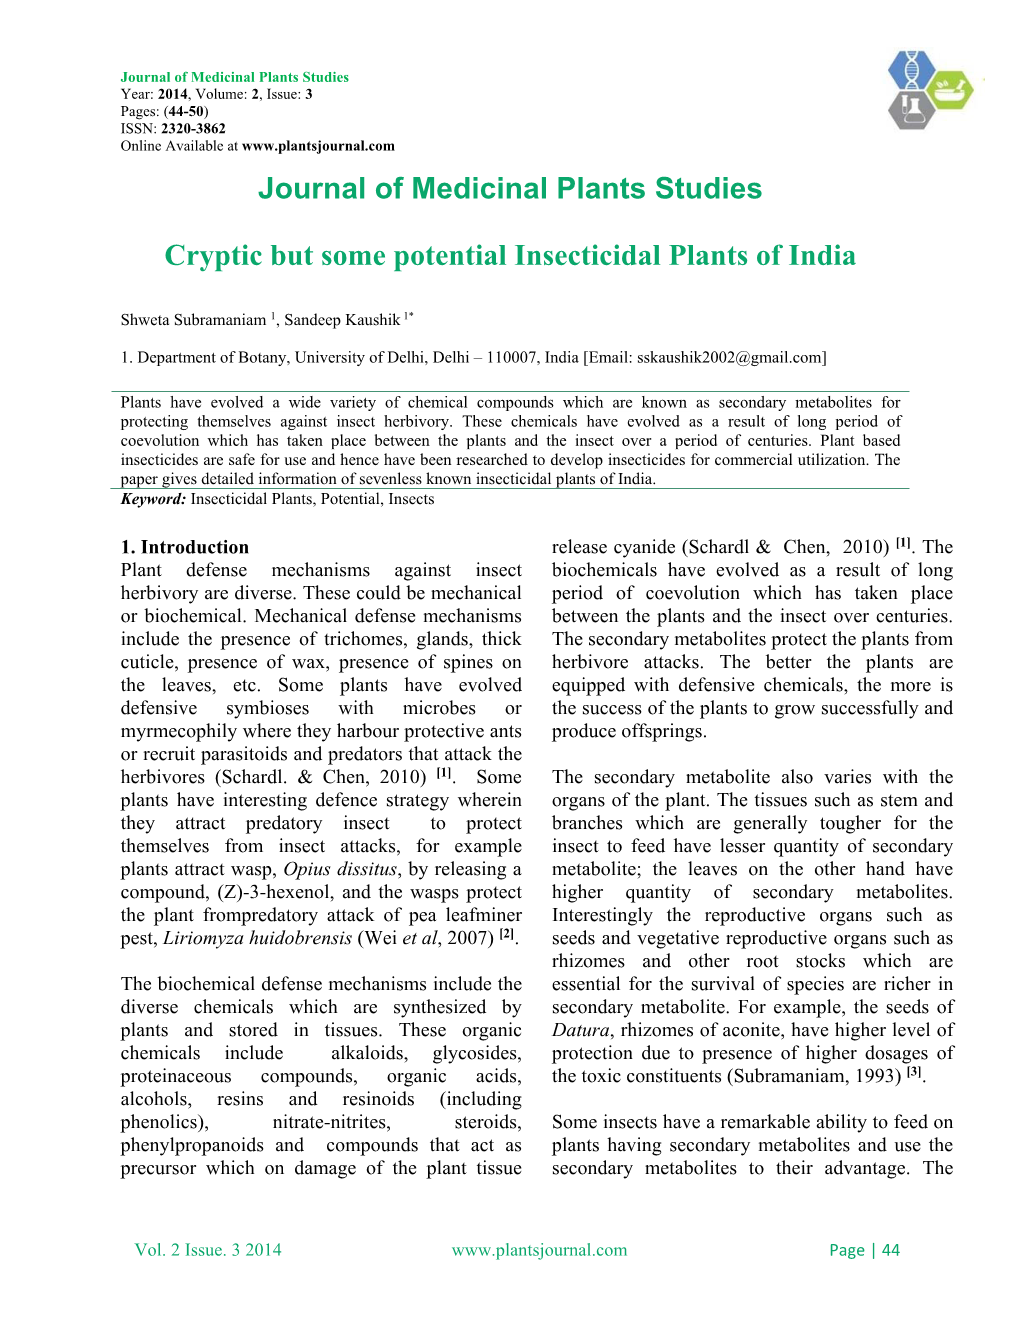 Journal of Medicinal Plants Studies Cryptic but Some Potential